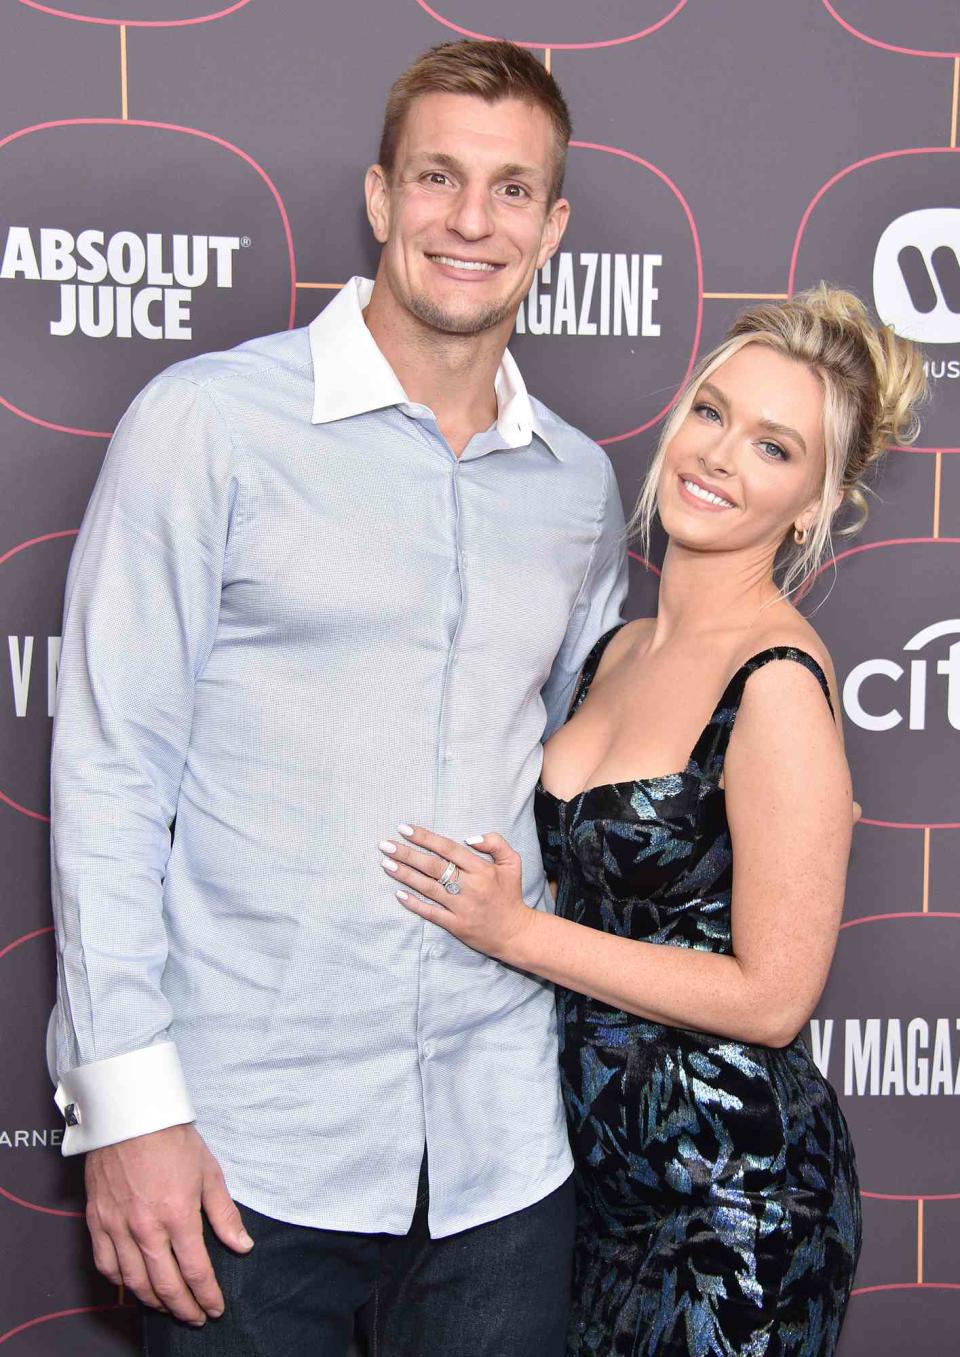 Rob Gronkowski and Camille Kostek attend the Warner Music Group Pre-Grammy Party 2020 at Hollywood Athletic Club on January 23, 2020 in Hollywood, California